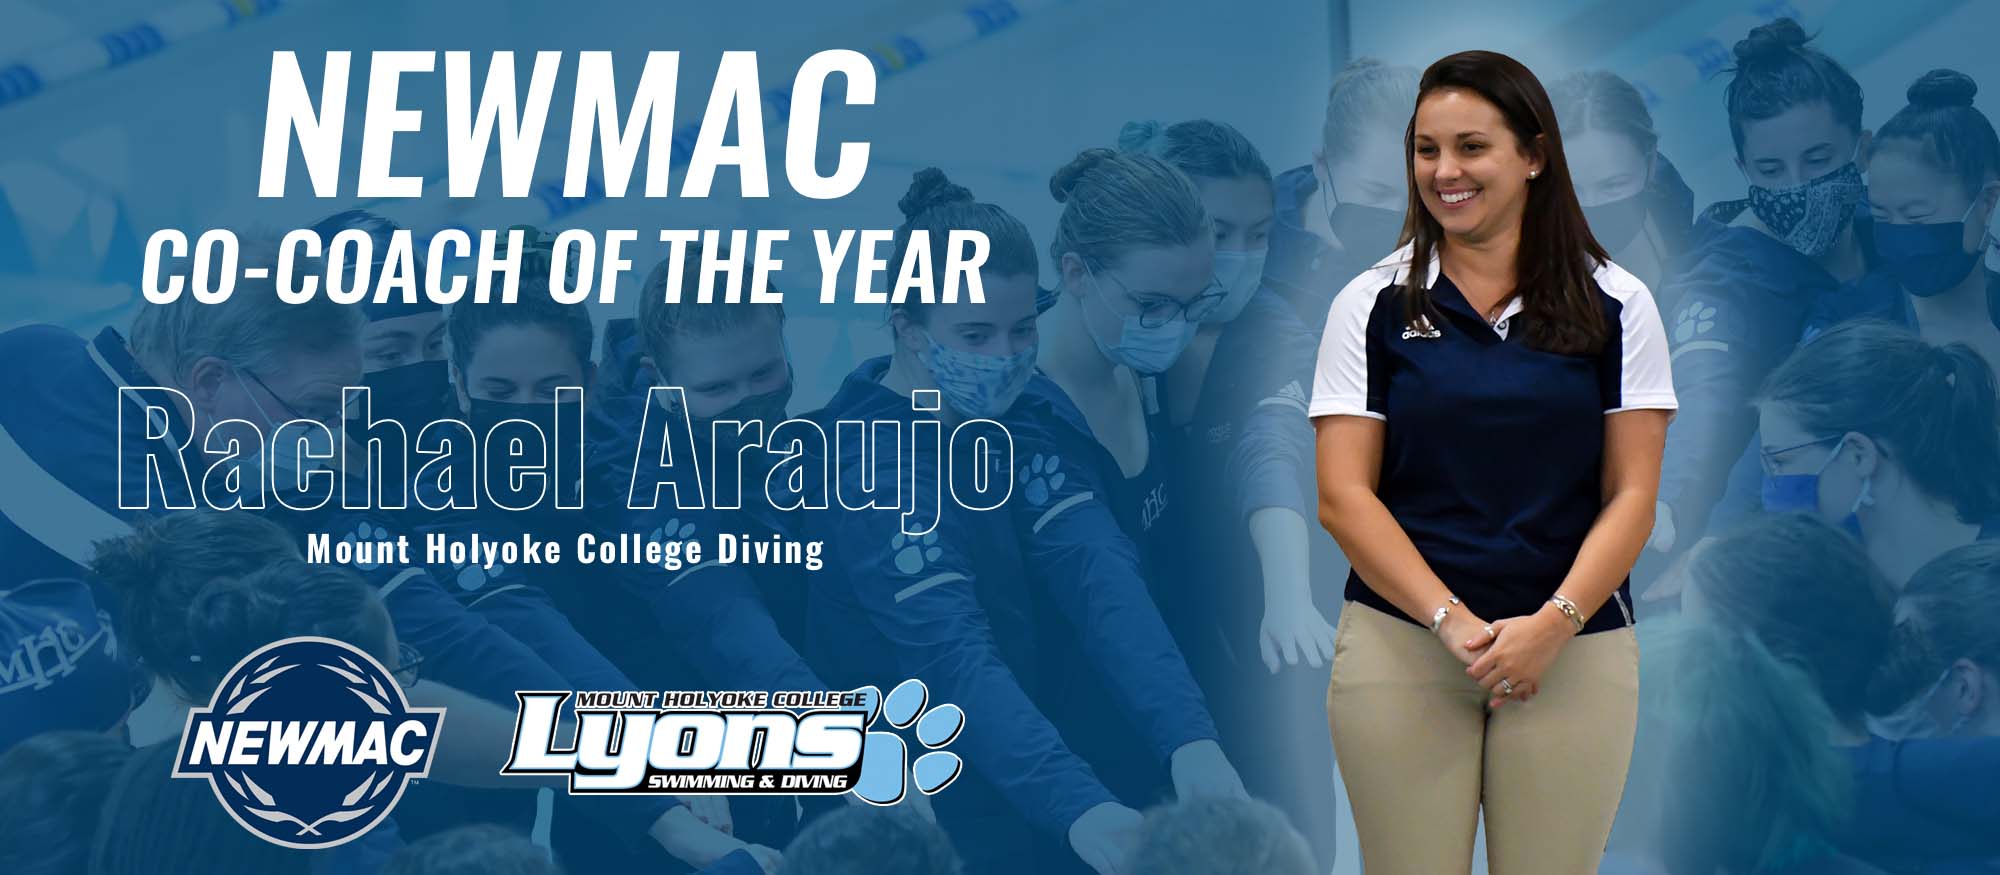 Araujo Collects NEWMAC Women's Diving Co-Coach of the Year Honors